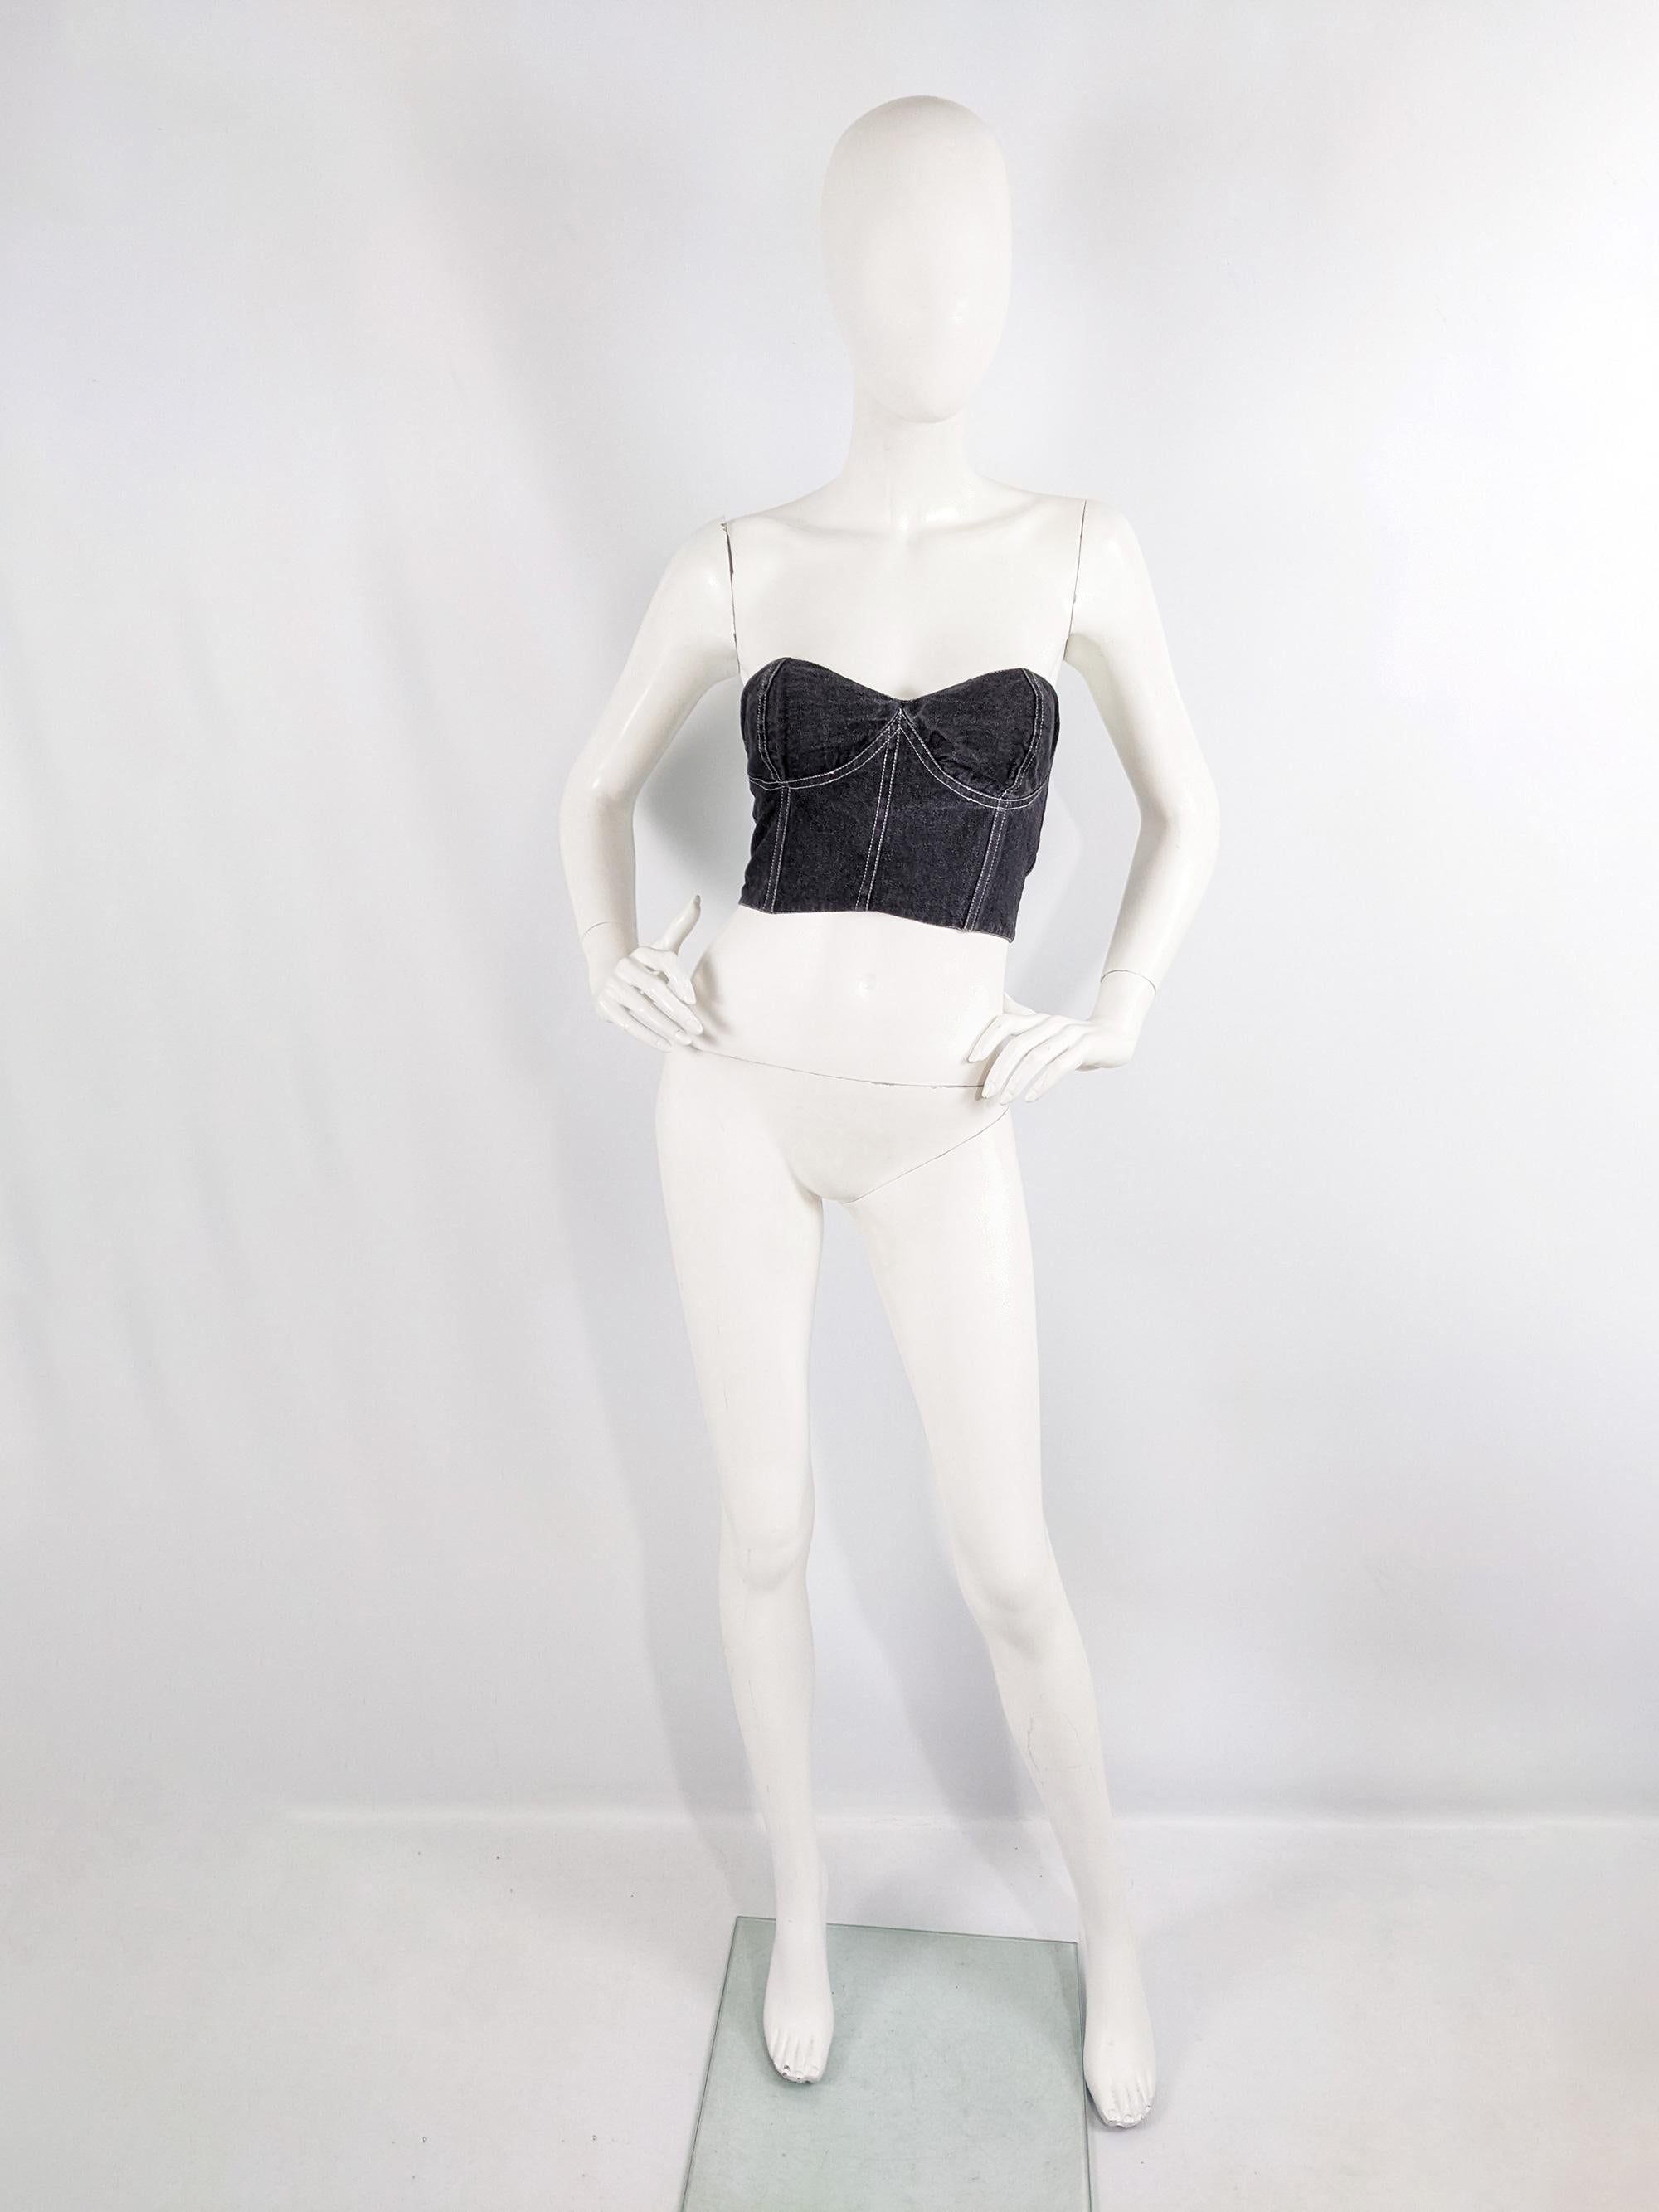 A cute vintage womens denim boob tube from the 80s by luxury Italian fashion label, Genny, who Gianni Versace designed for before starting his own label. Made in Italy from a black denim with white top stitching and a sweetheart neckline.

Size: